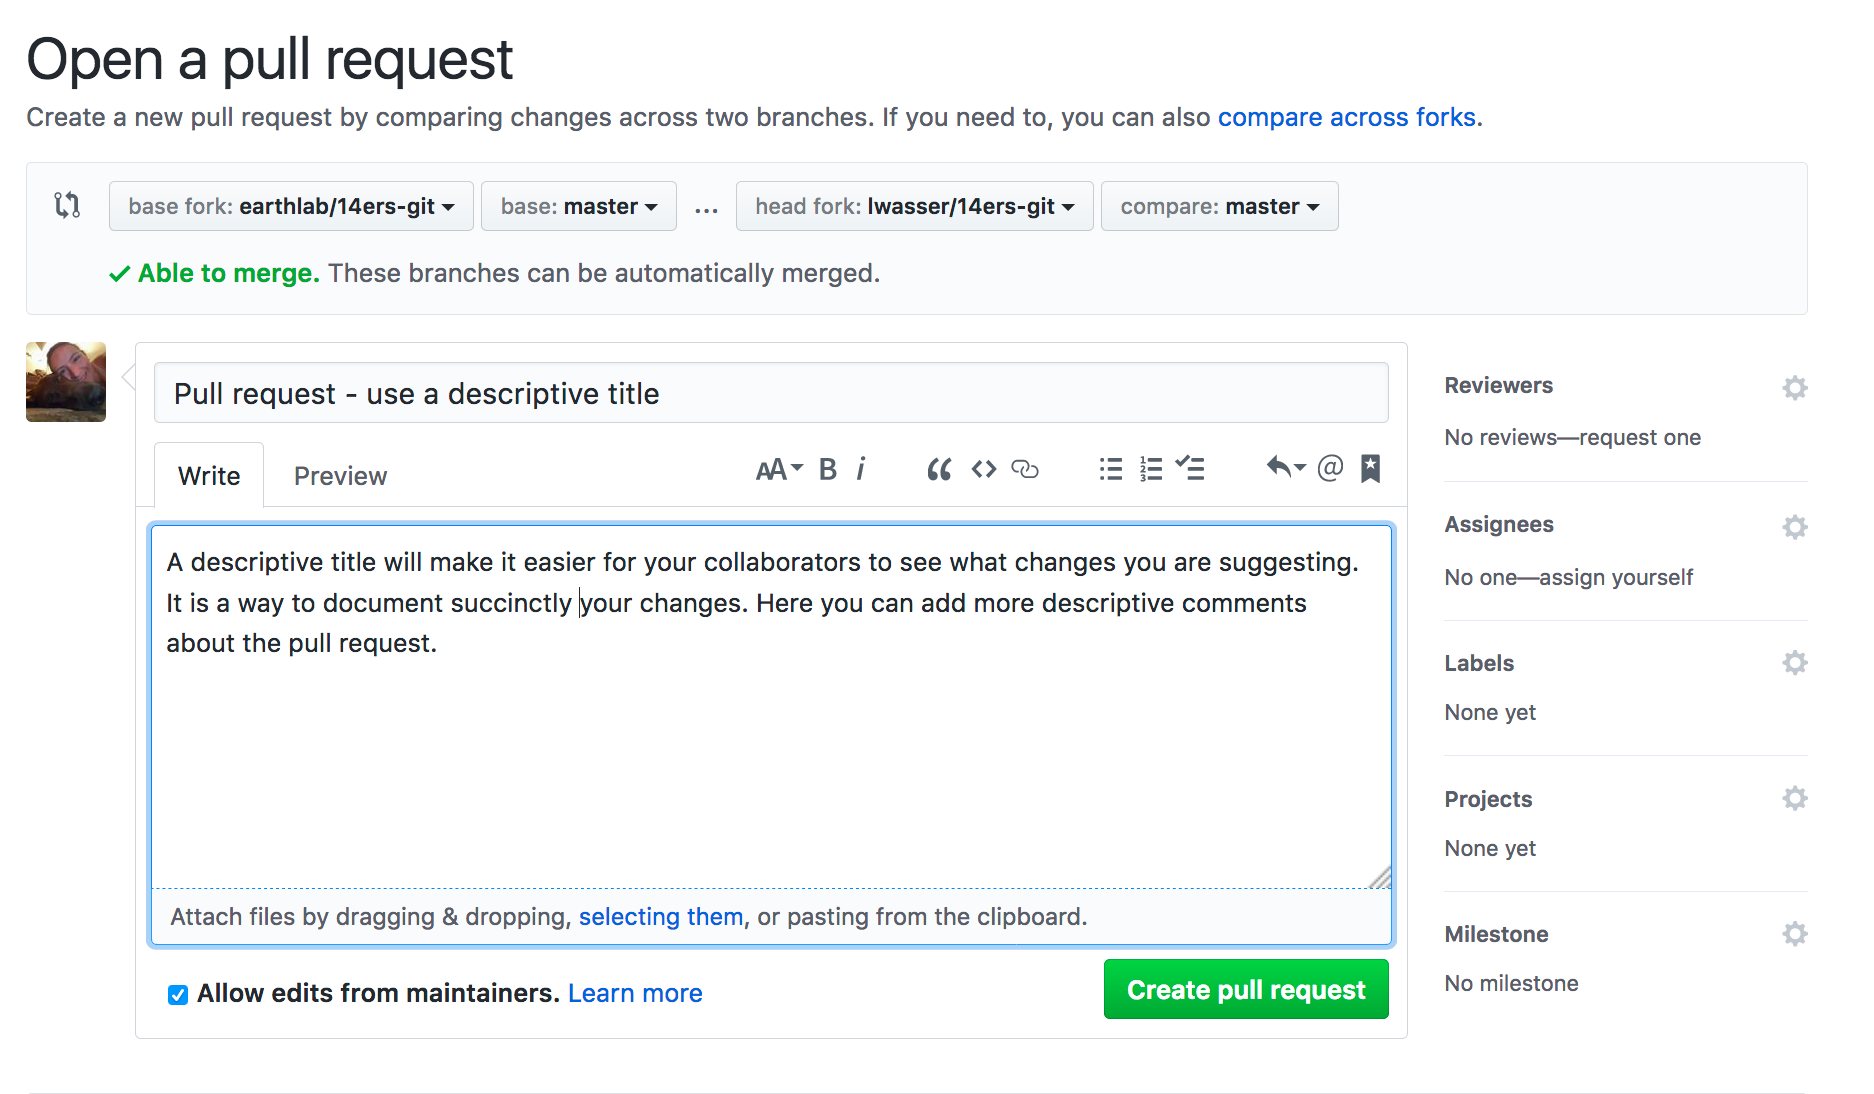 Pull request titles should be concise and descriptive of the content in the pull request. More detailed notes can be left in the comments box.